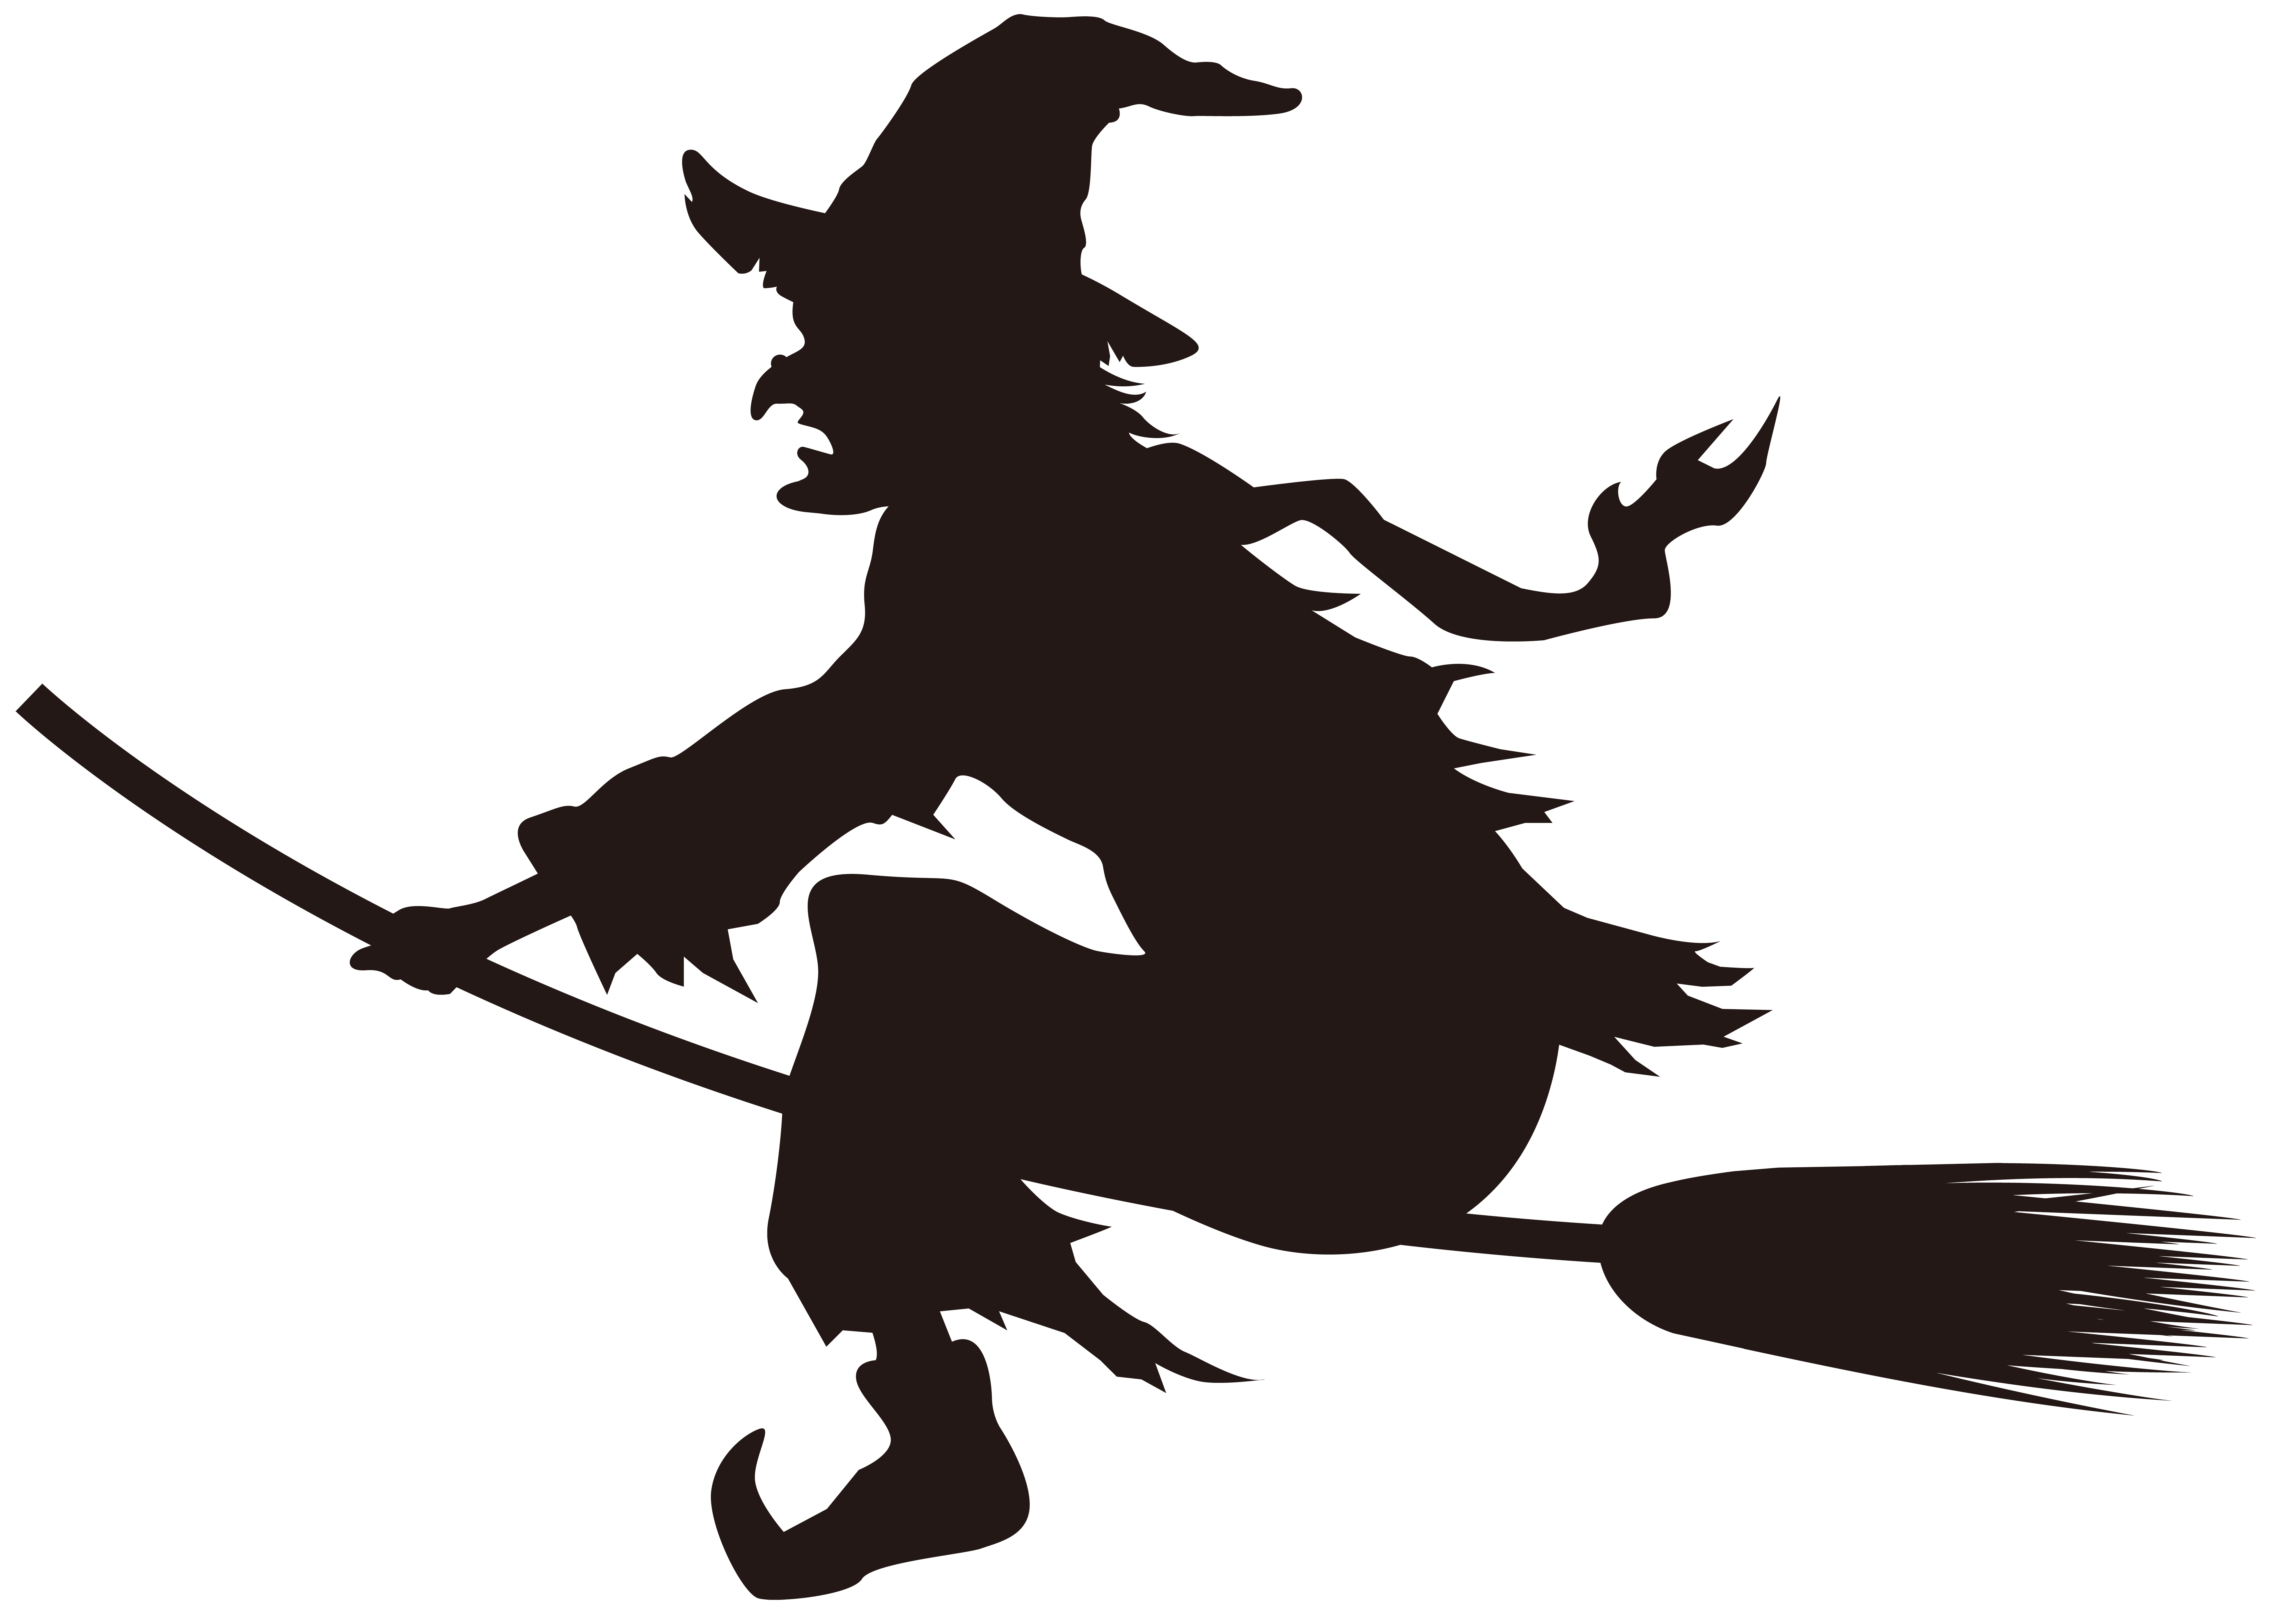 halloween witch png